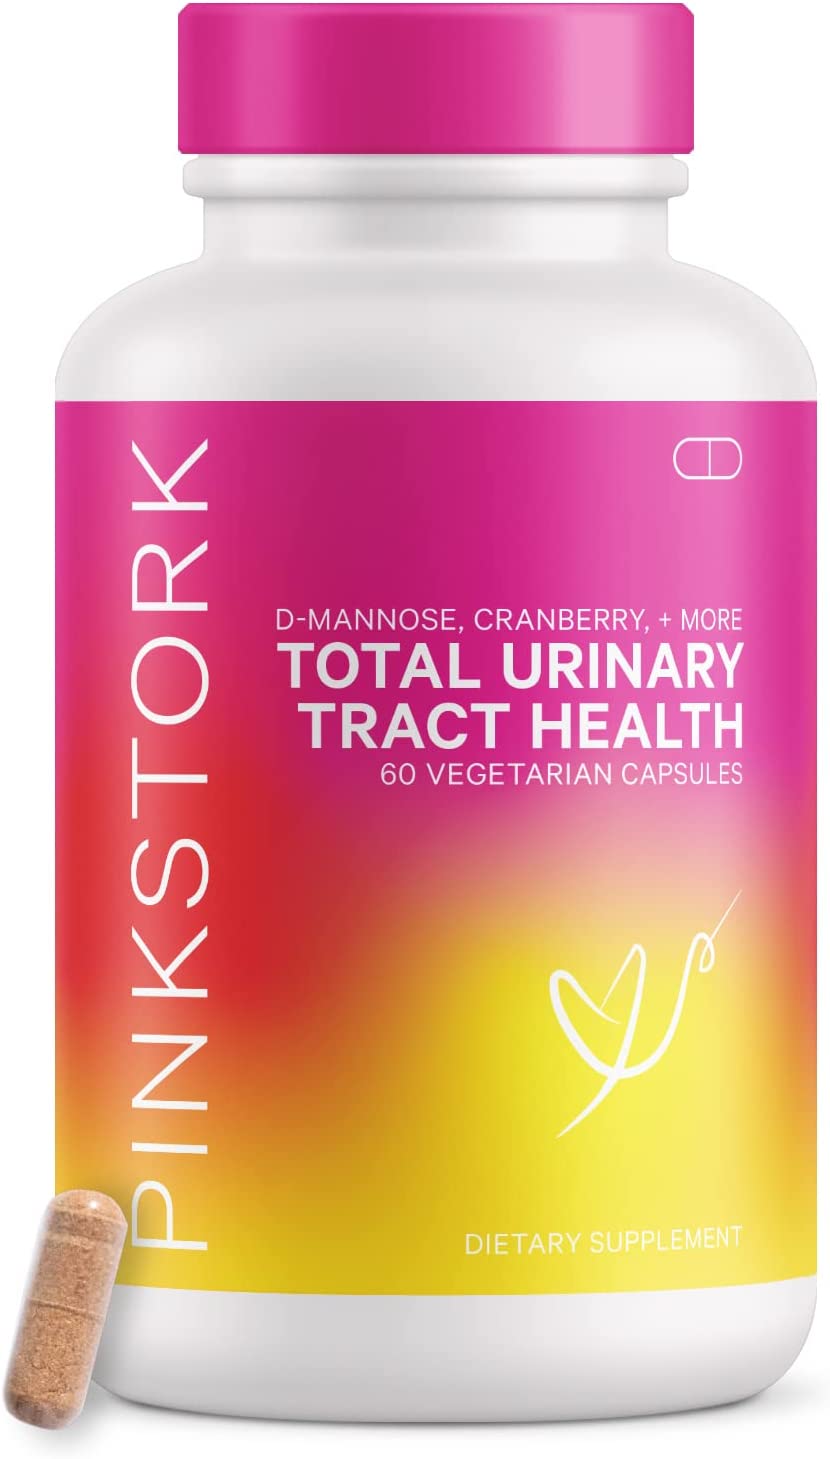 Pink Stork Total Urinary Tract Health: Cranberry Pills for Urinary Tract, D-Mannose, & UTI Health, Support Urinary Tract Health, Fast-Acting UTI Symptom Relief, Women-Owned, 60 Capsules